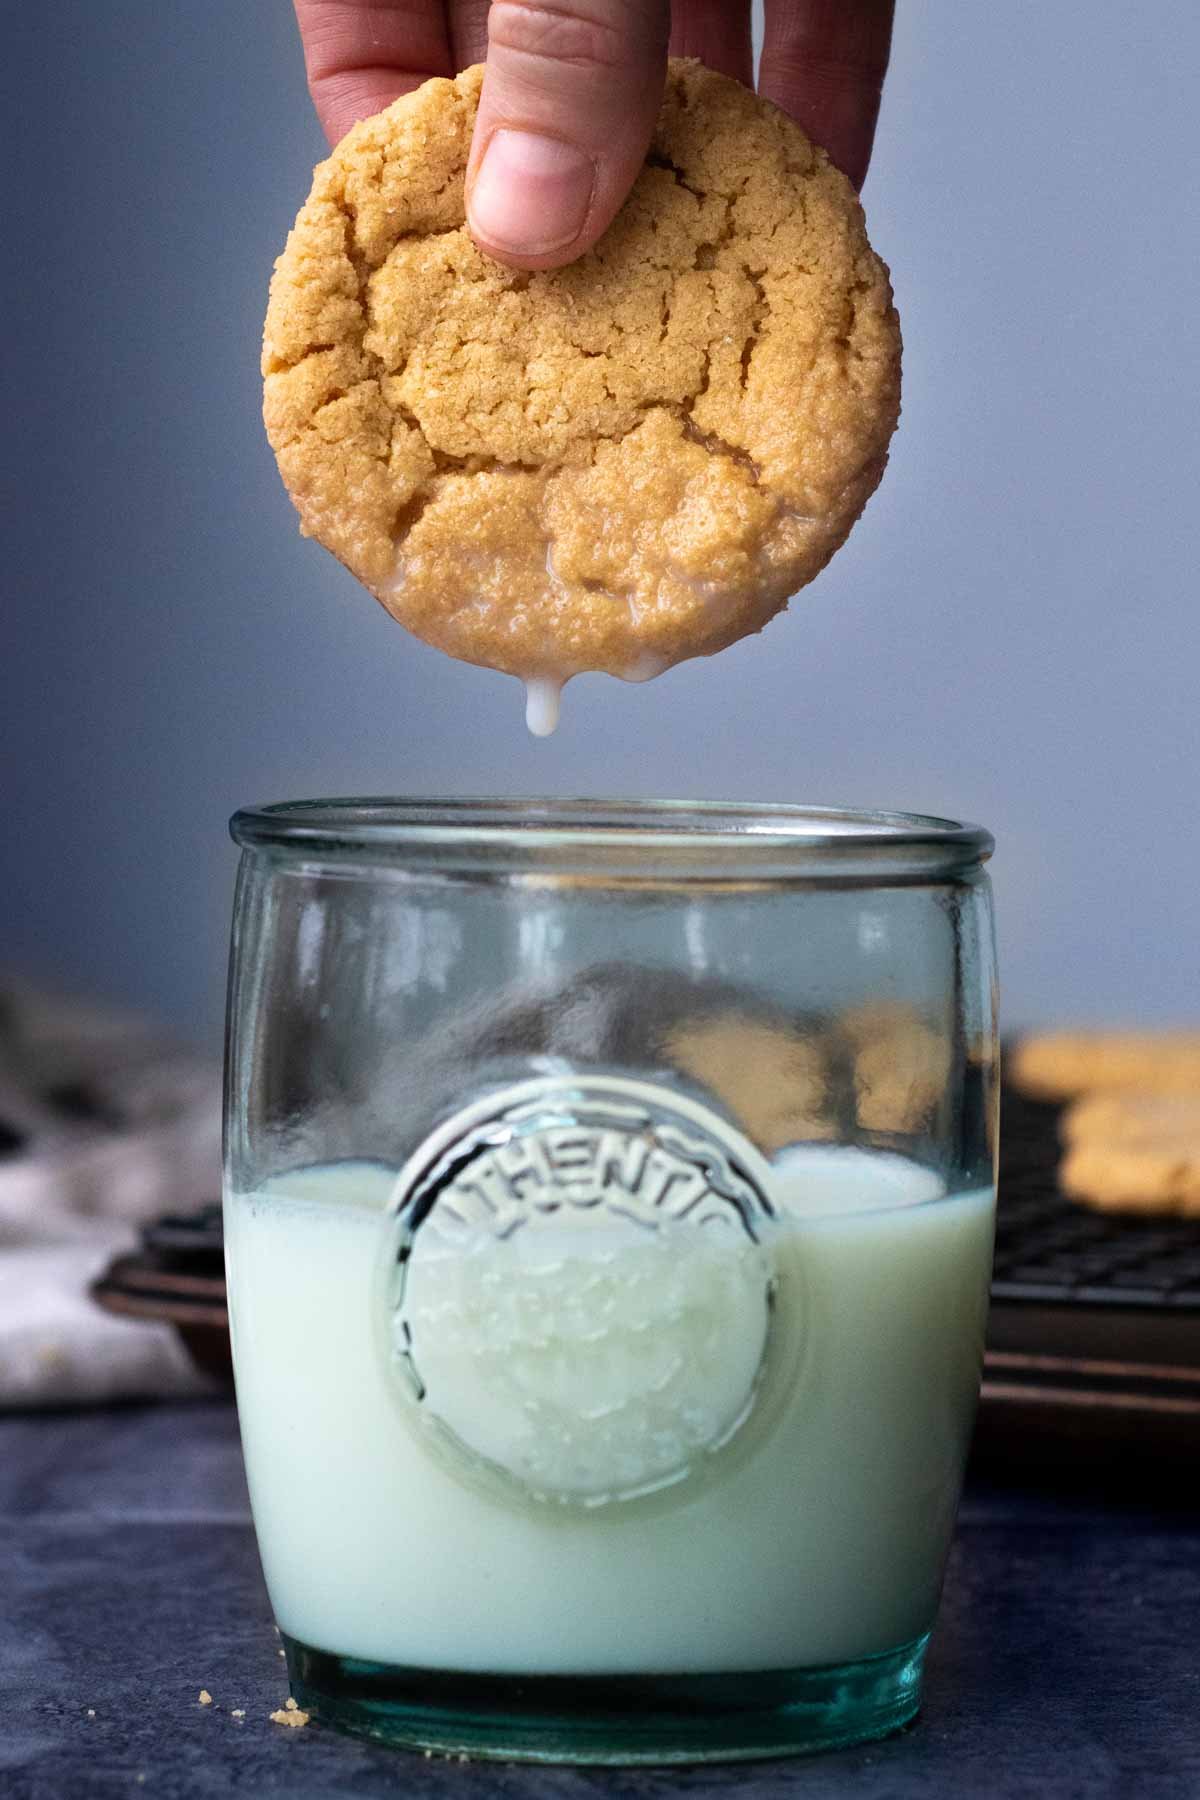 a cookie being dunked into a glass of milk